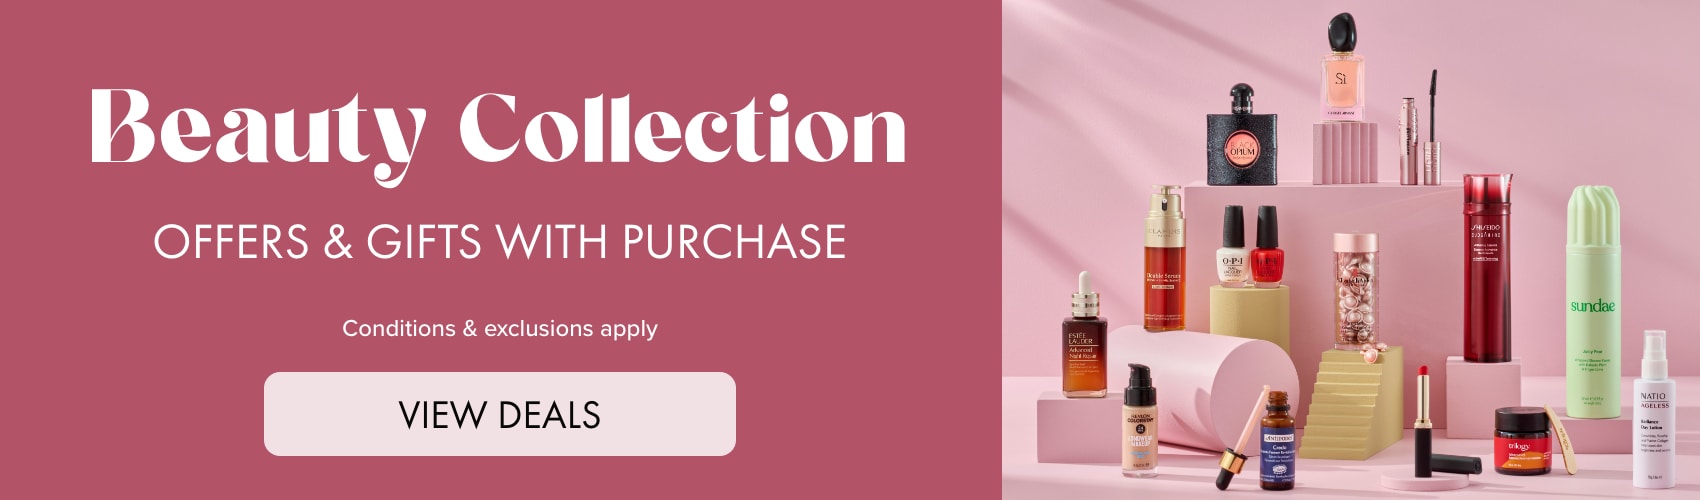 Beauty Collection Offers & Gift with Purchase